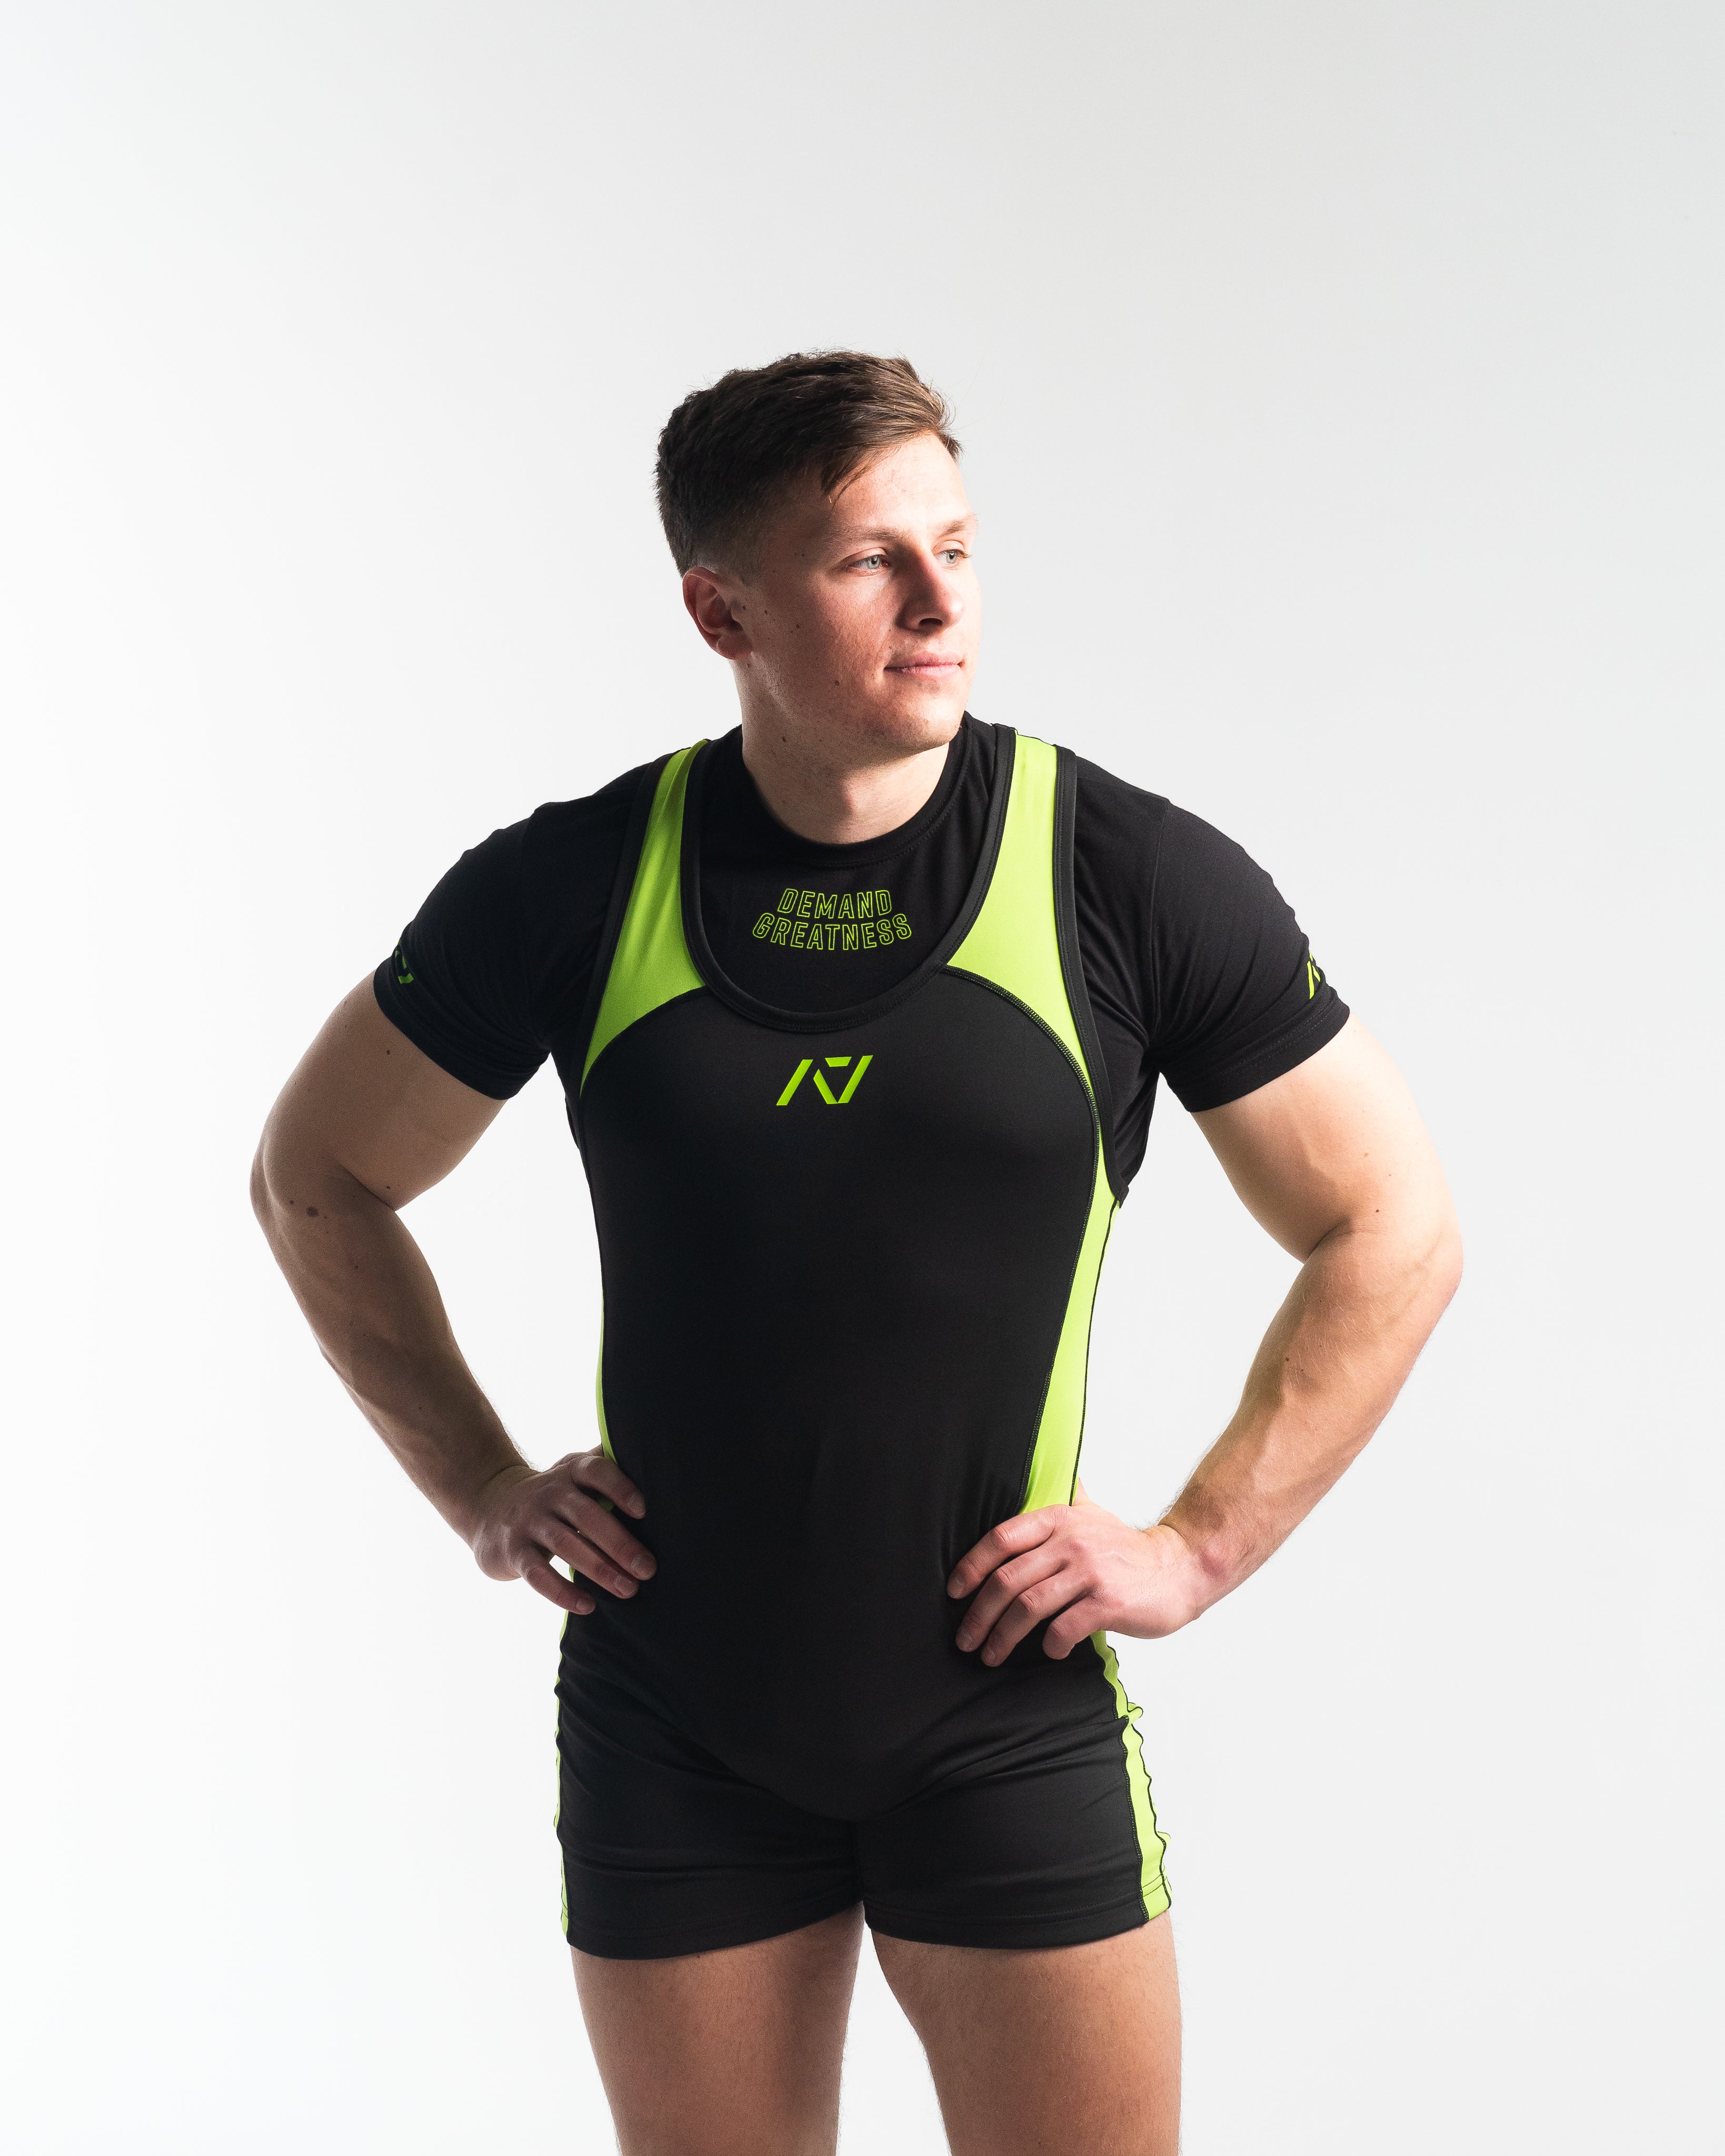 A7 IPF Approved Alien Luno singlet features extra lat mobility, side panel stitching to guide the squat depth level and curved panel design for a slimming look. The Women's cut singlet features a tapered waist and additional quad room. The IPF Approved Kit includes Powerlifting Singlet, A7 Meet Shirt, Deadlift Socks, Hourglass Knee Sleeves (Stiff Knee Sleeves and Rigor Mortis Knee Sleeves). Genouillères powerlifting shipping to France, Spain, Ireland, Germany, Italy, Sweden and EU. 